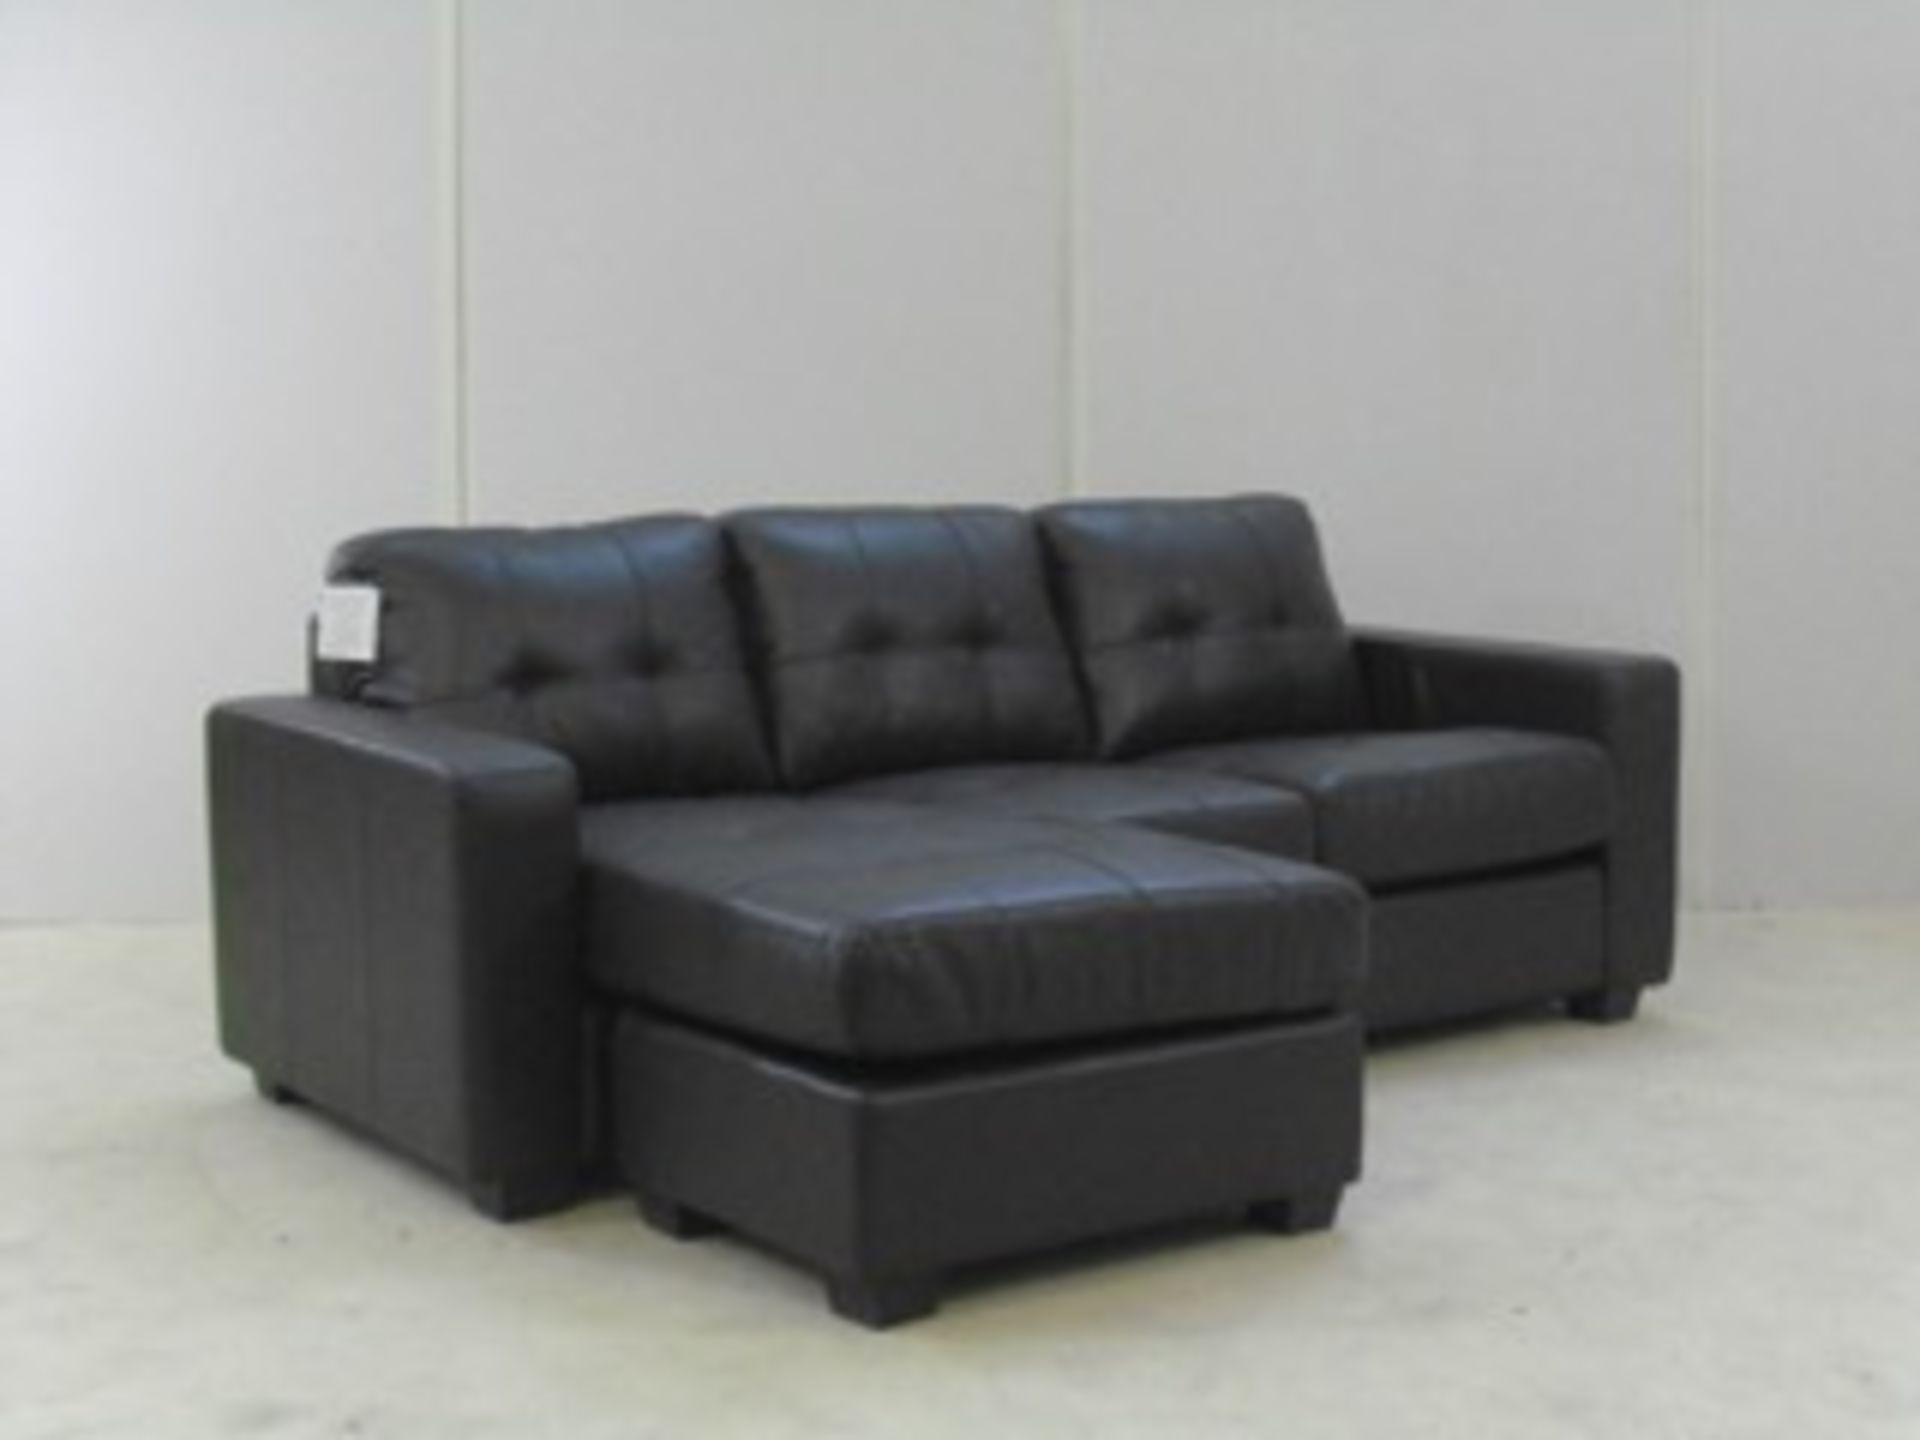 Cosmo 3str Chaise - Brown - 900H x 1550W x 2220L - Image 3 of 3